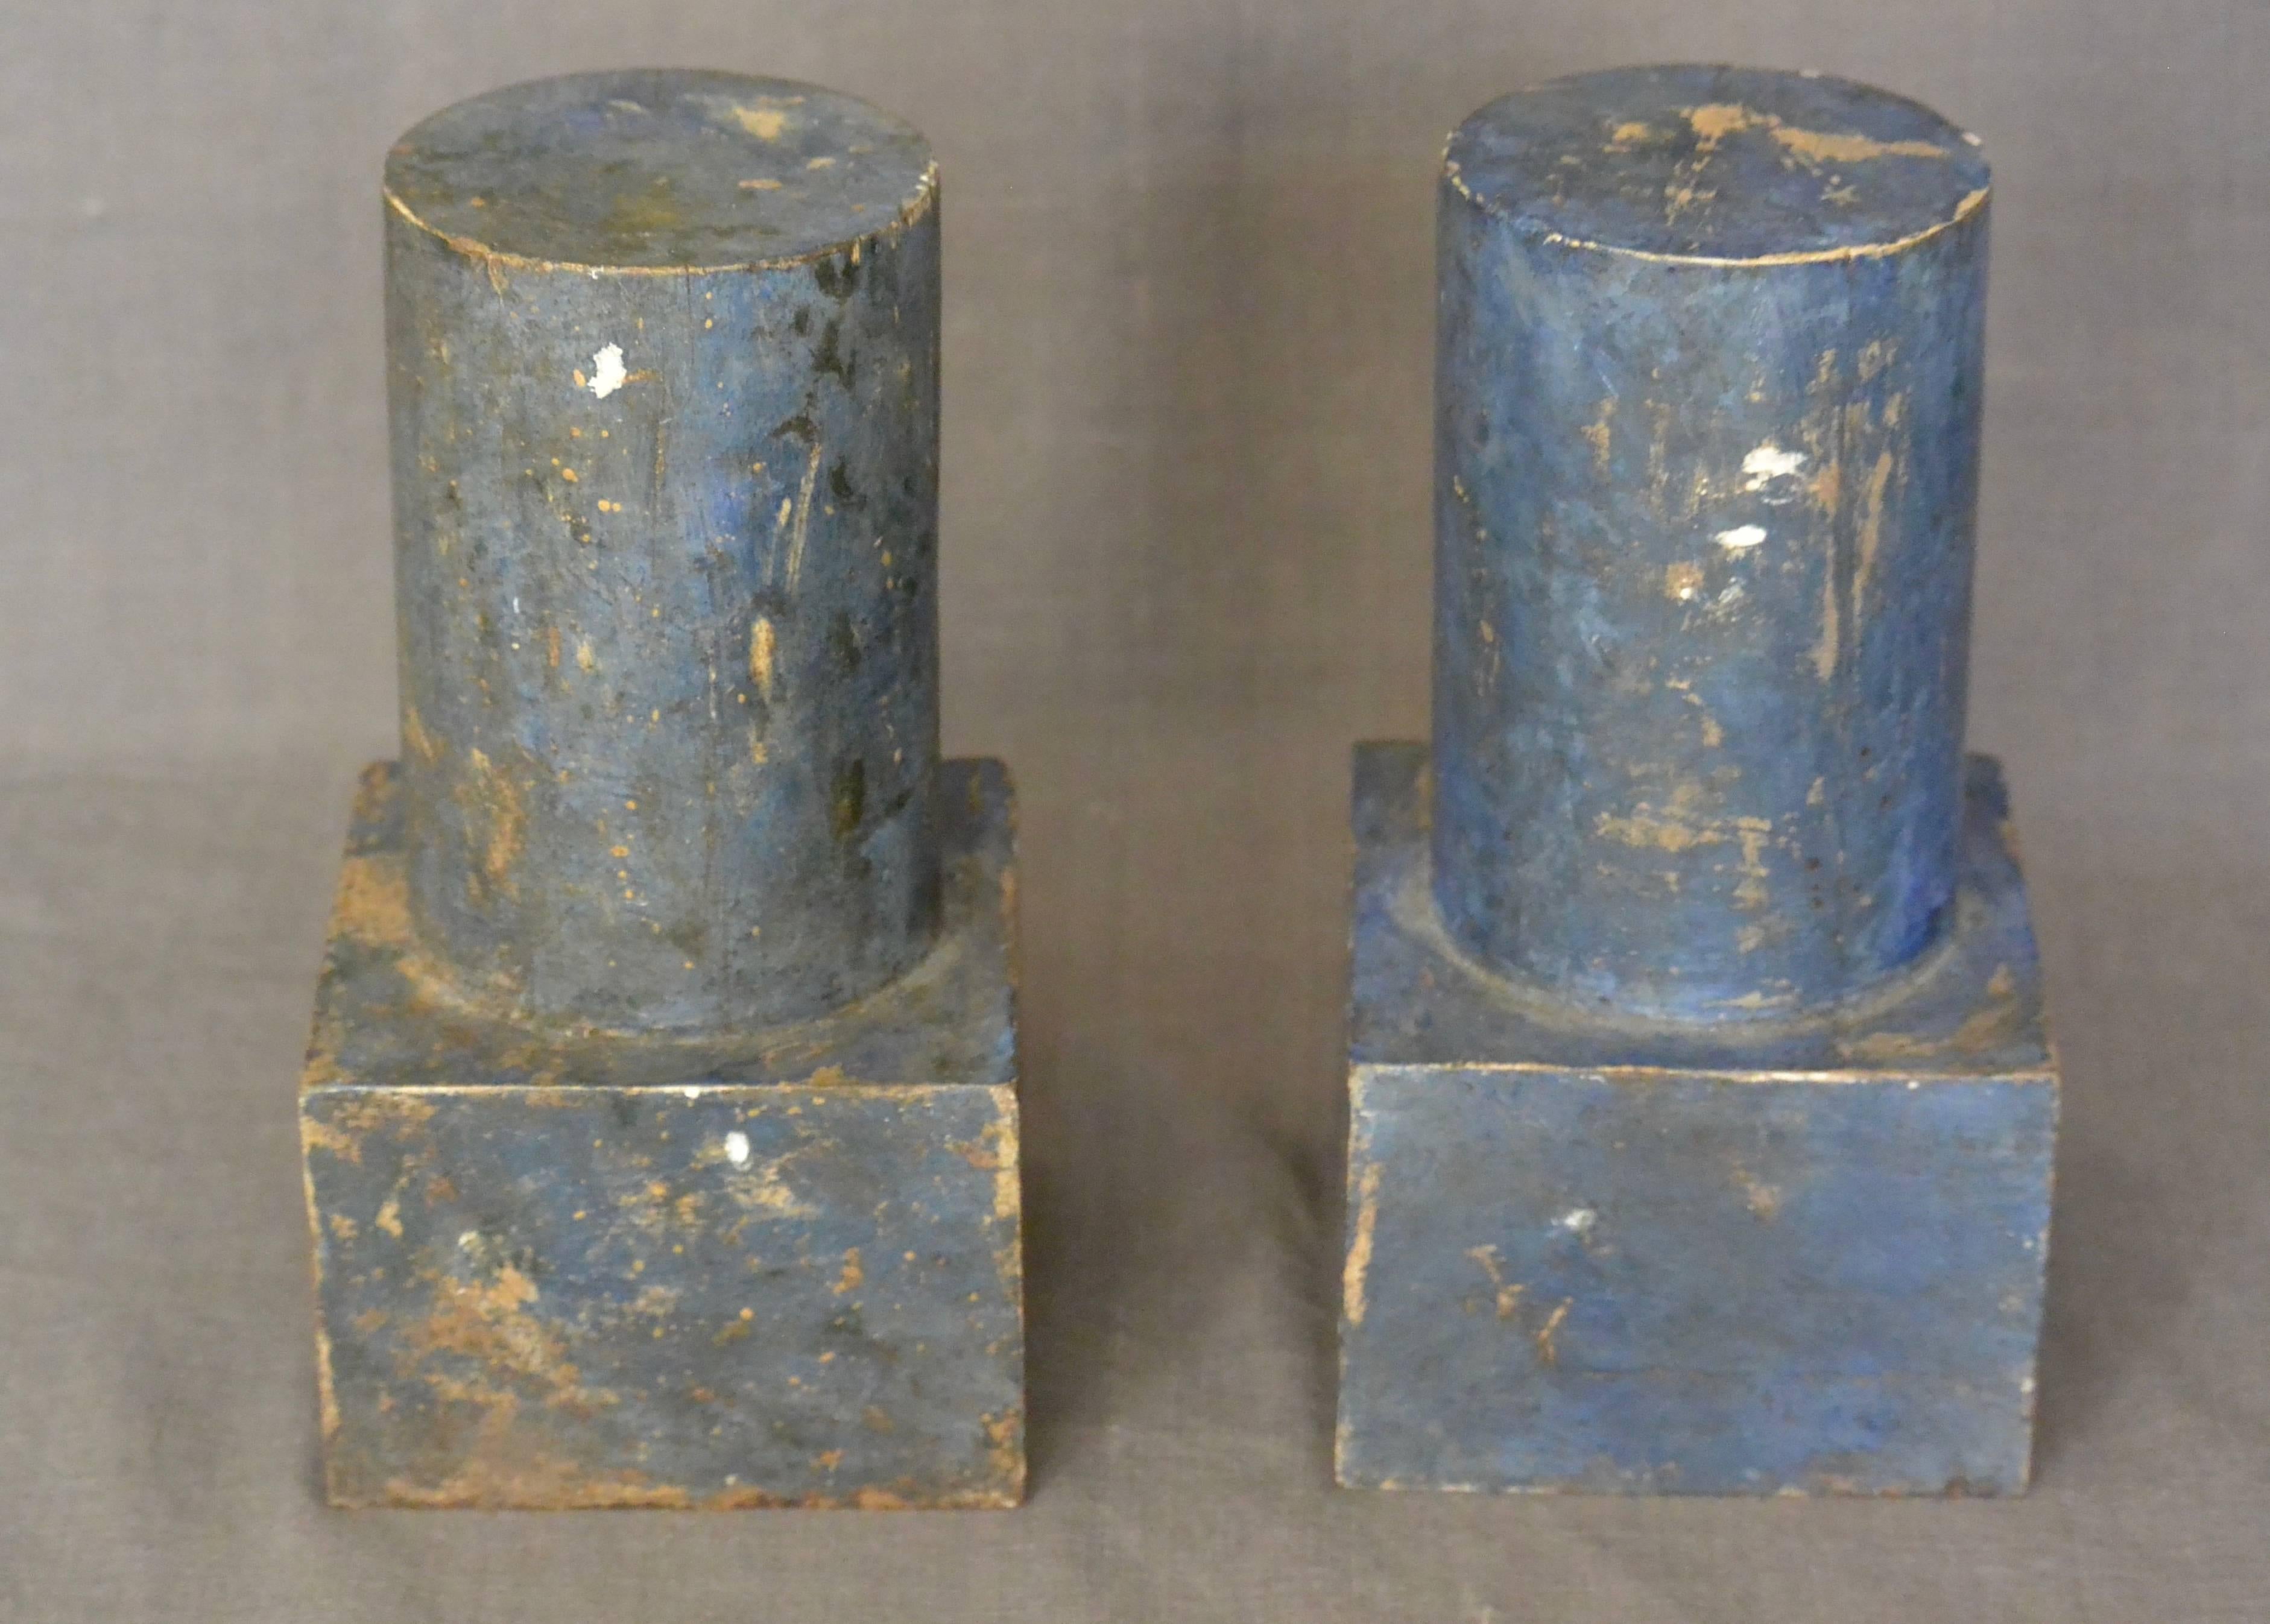 Pair of decorative blue painted Italian small mahogany pedestals. Pair of decorative blue painted mahogany columns bases on plinths in a mottled faux lapis color, Italy, circa 1930.
Dimensions: 4